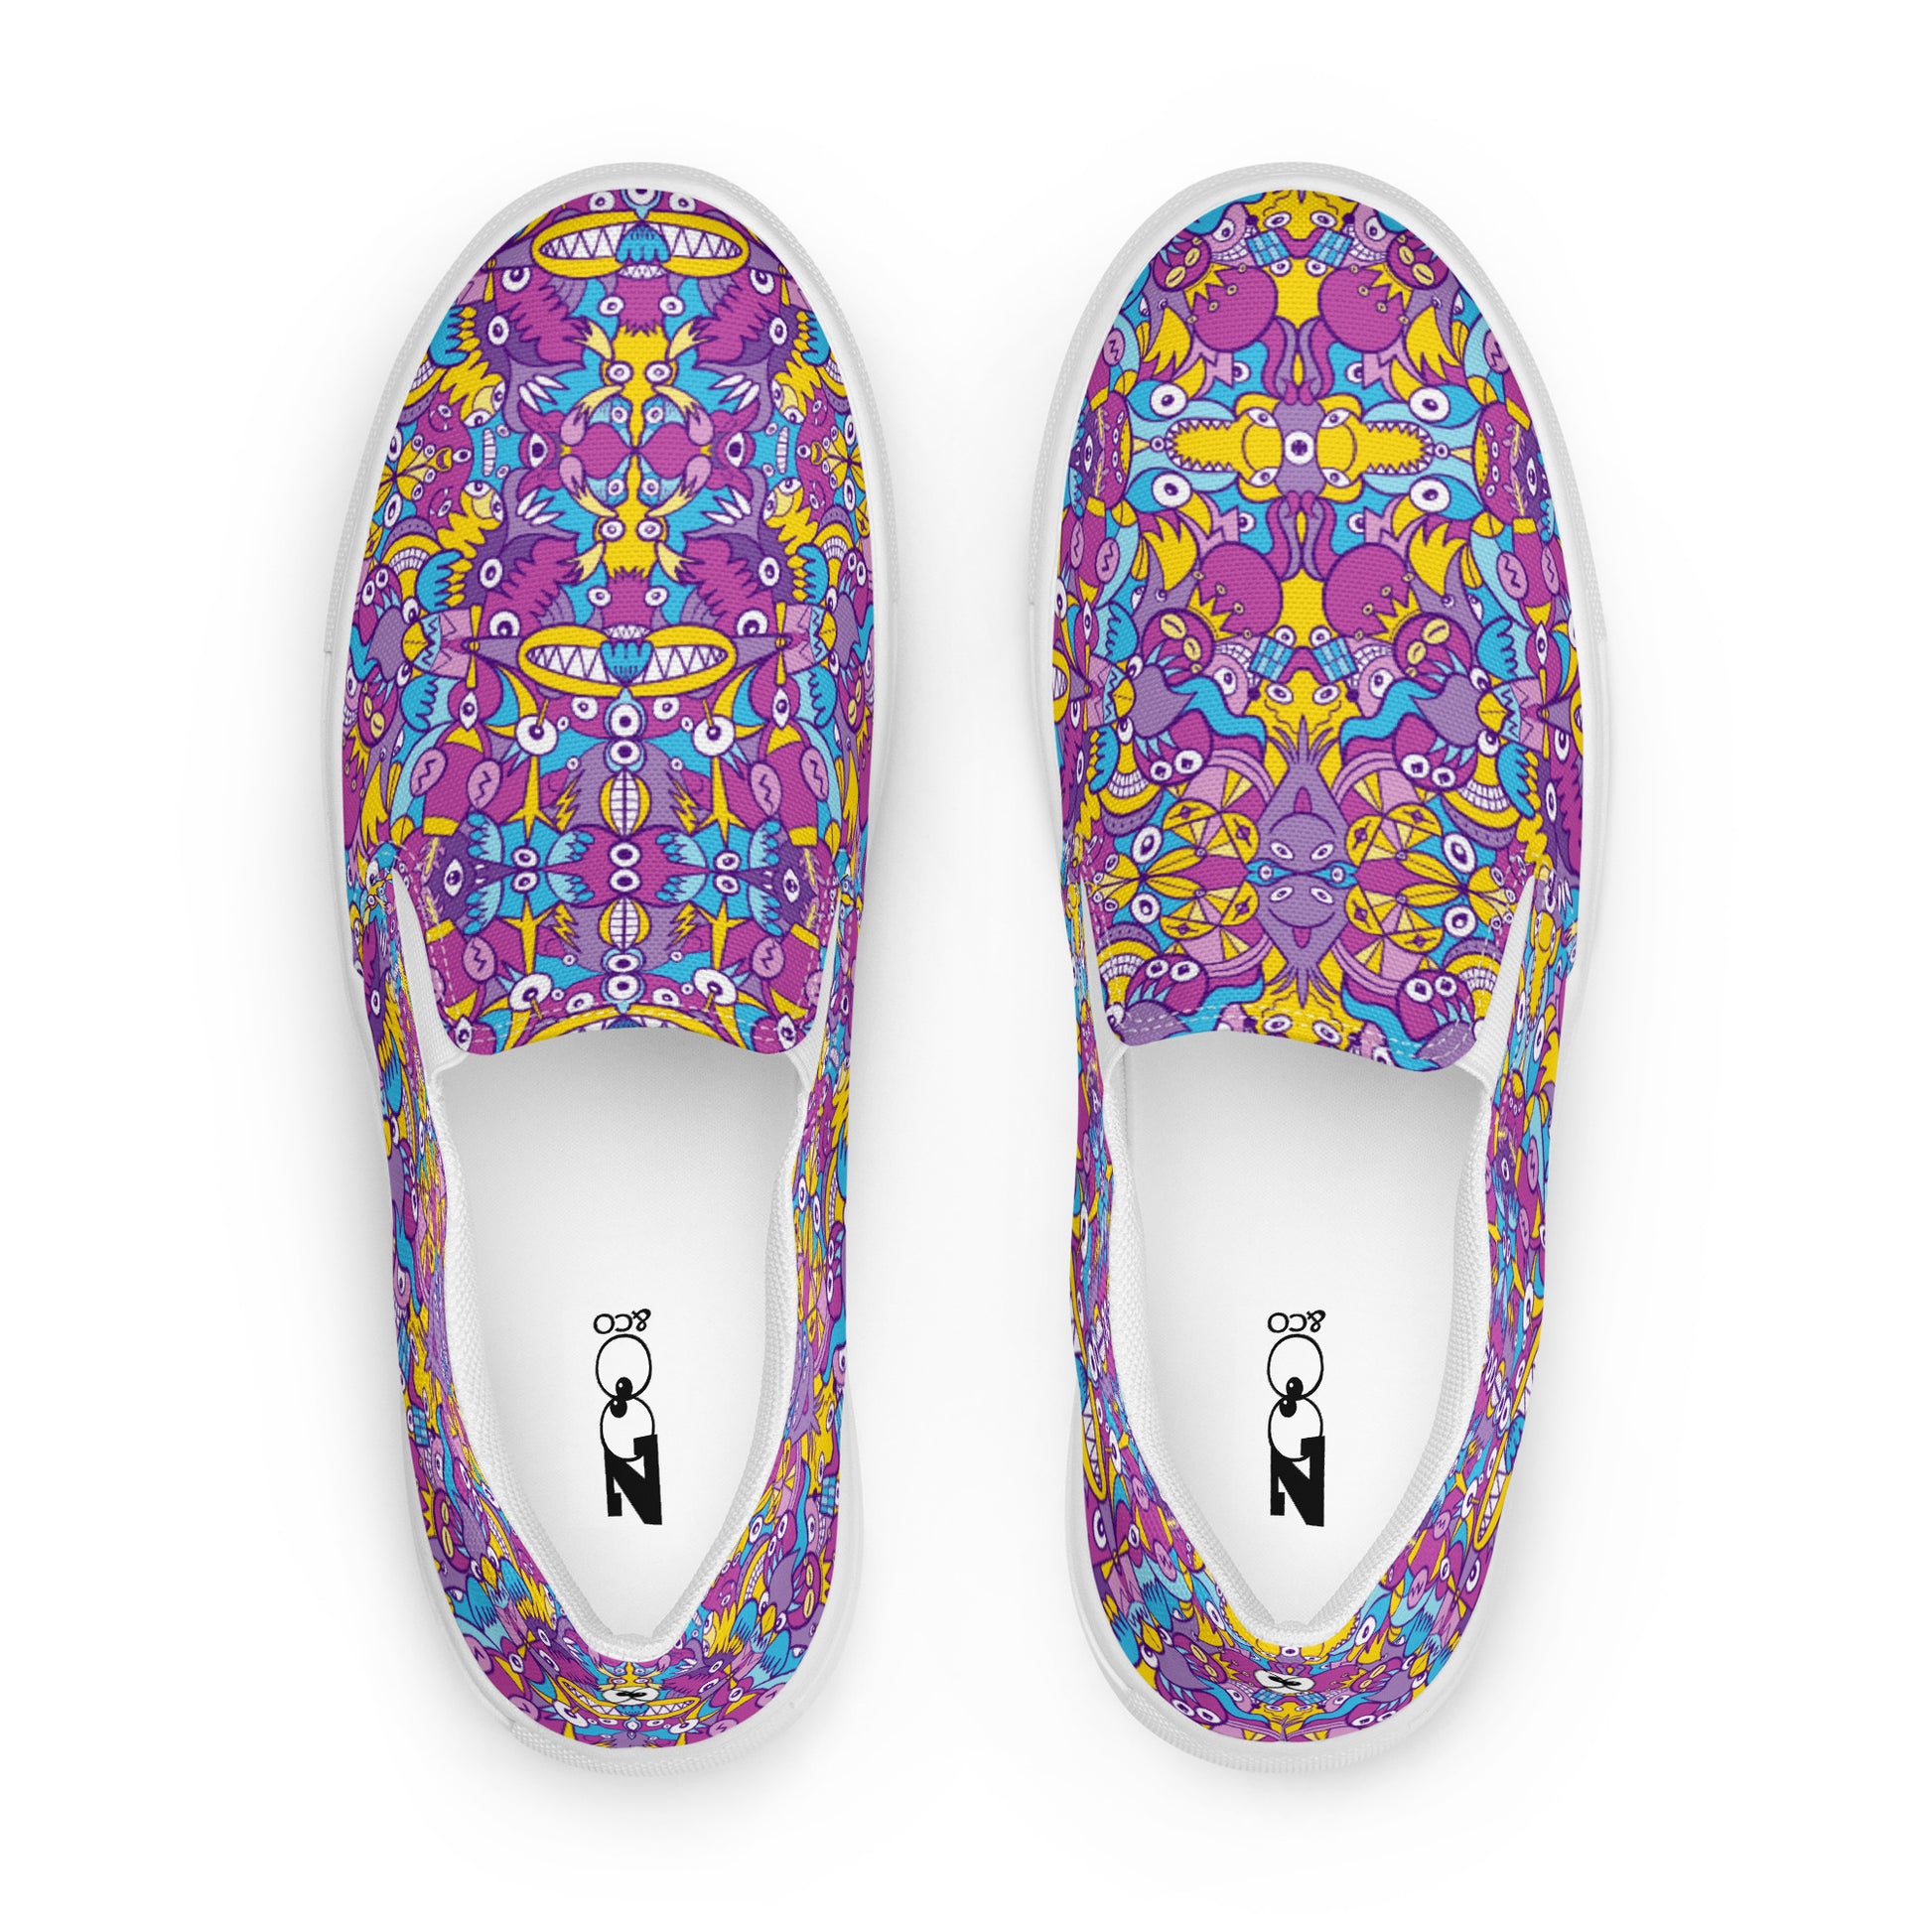 Doodle art compulsion is out of control Women’s slip-on canvas shoes. Top view